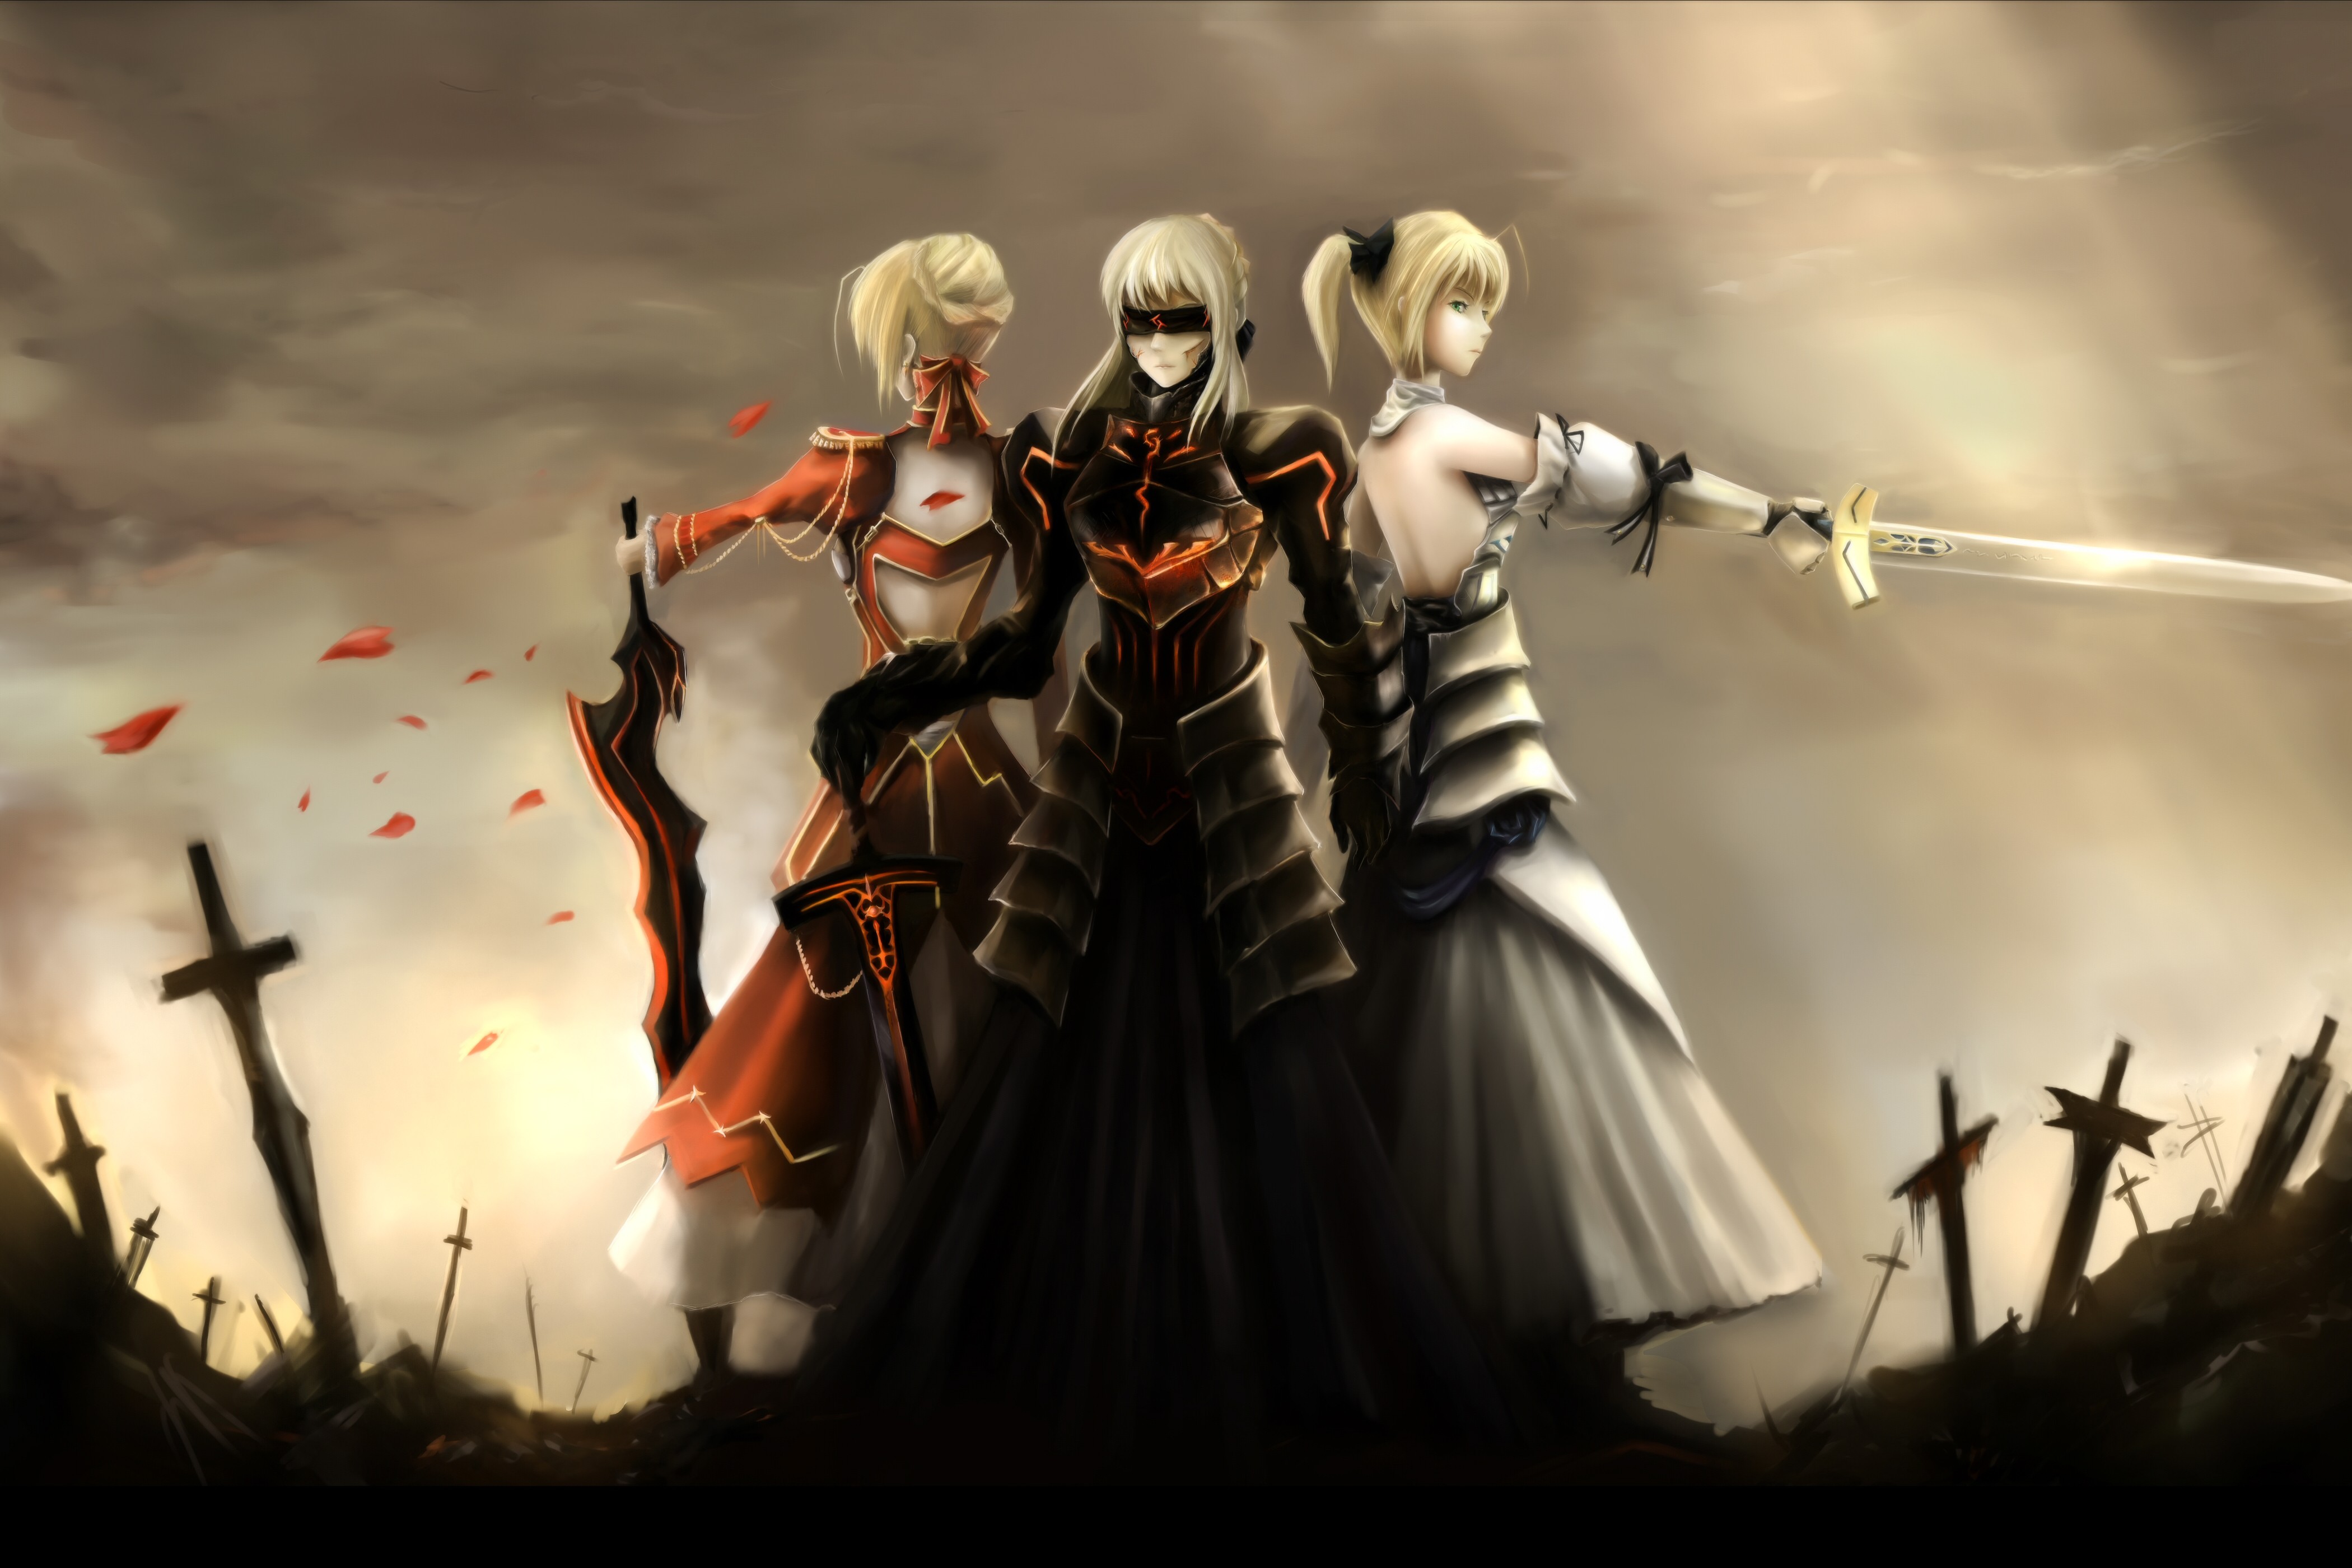 Anime Anime Girls Fate Series Saber Alter Saber Lily Saber Fate Stay Night Saber Extra Sword 4200x2800